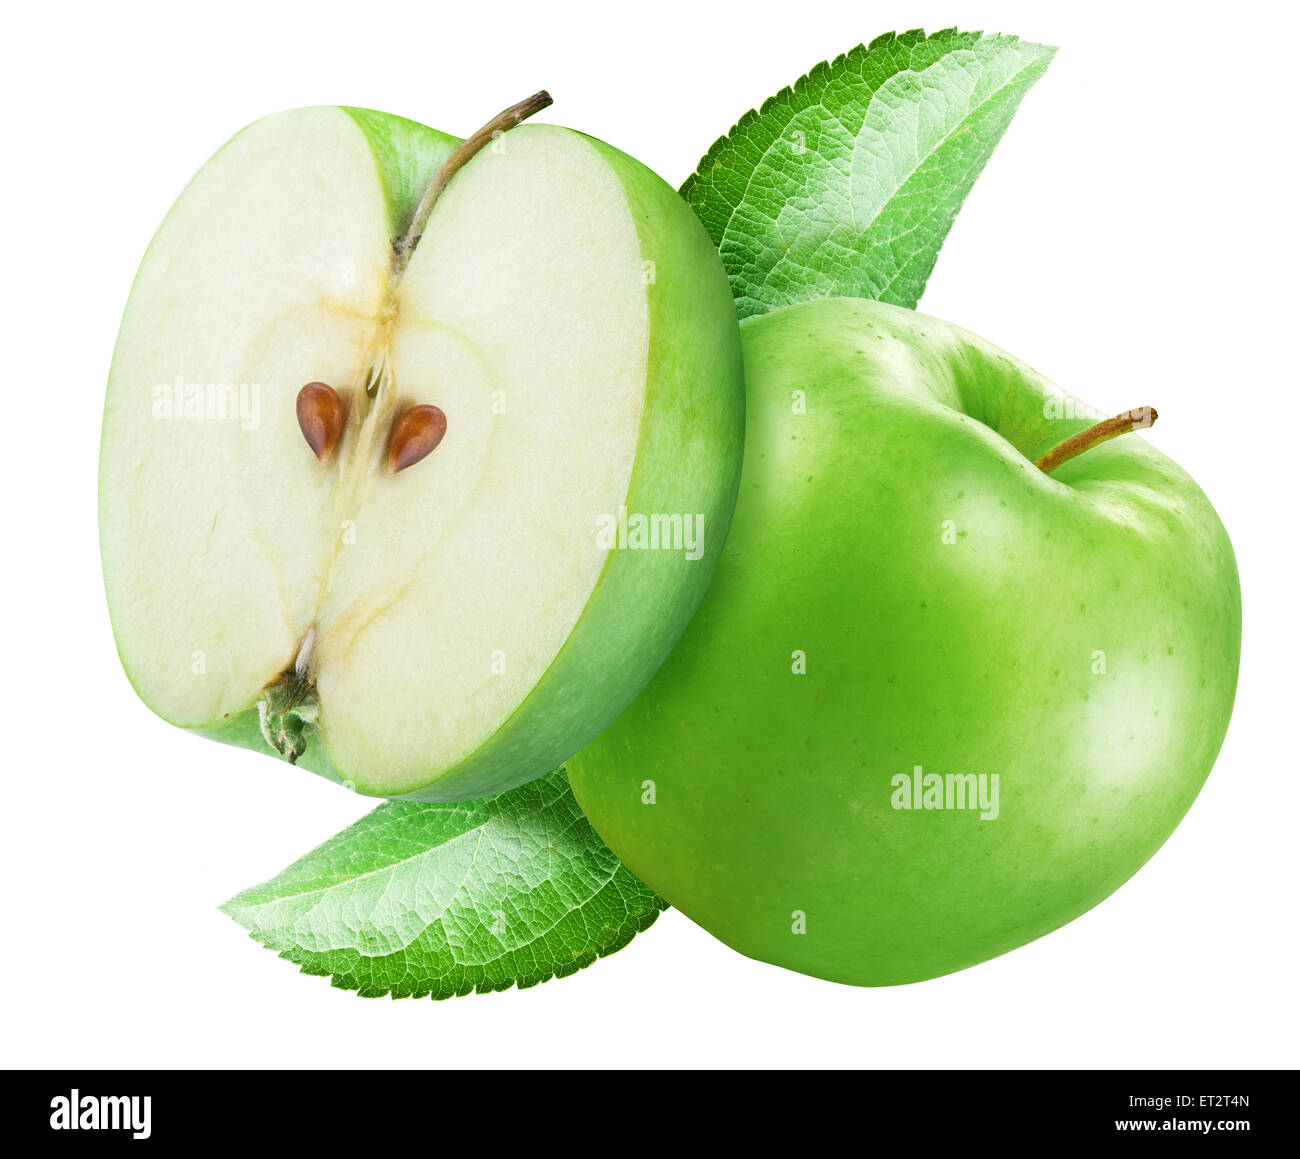 Green apple and a half of apple. File contains clipping paths. Stock Photo